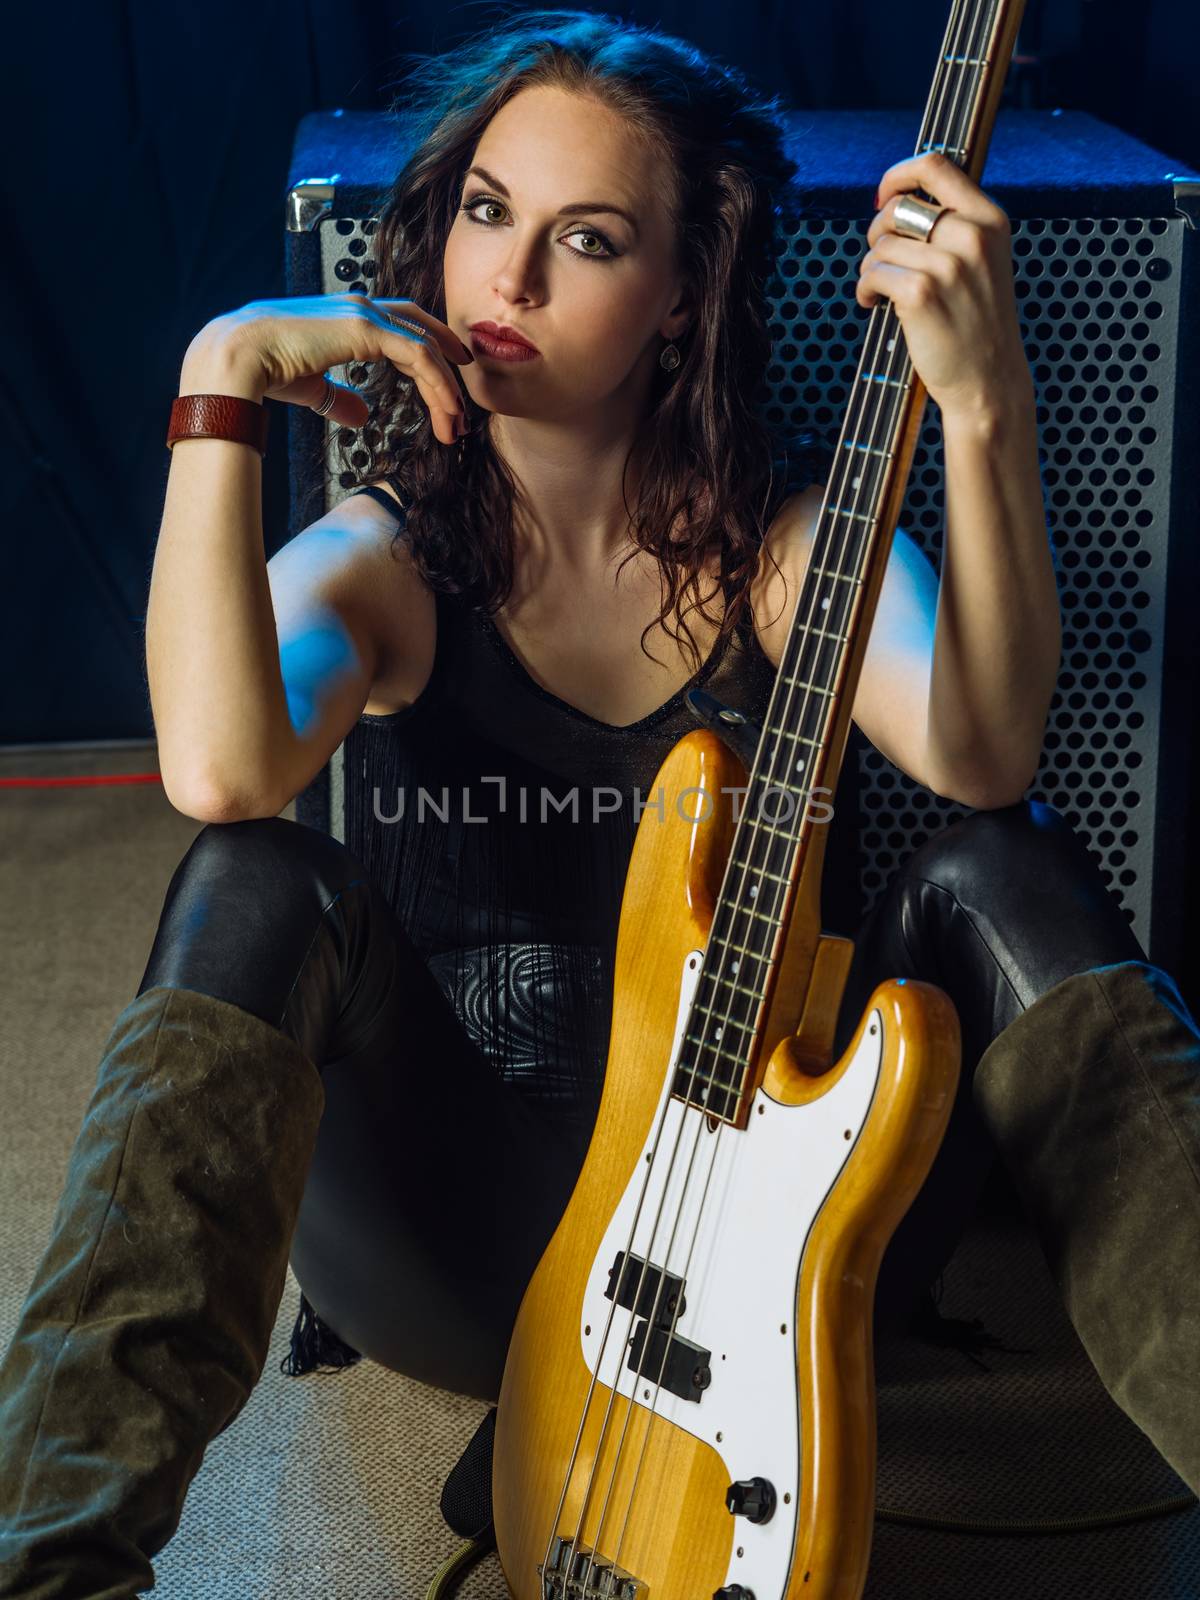 Beautiful woman bass player by sumners